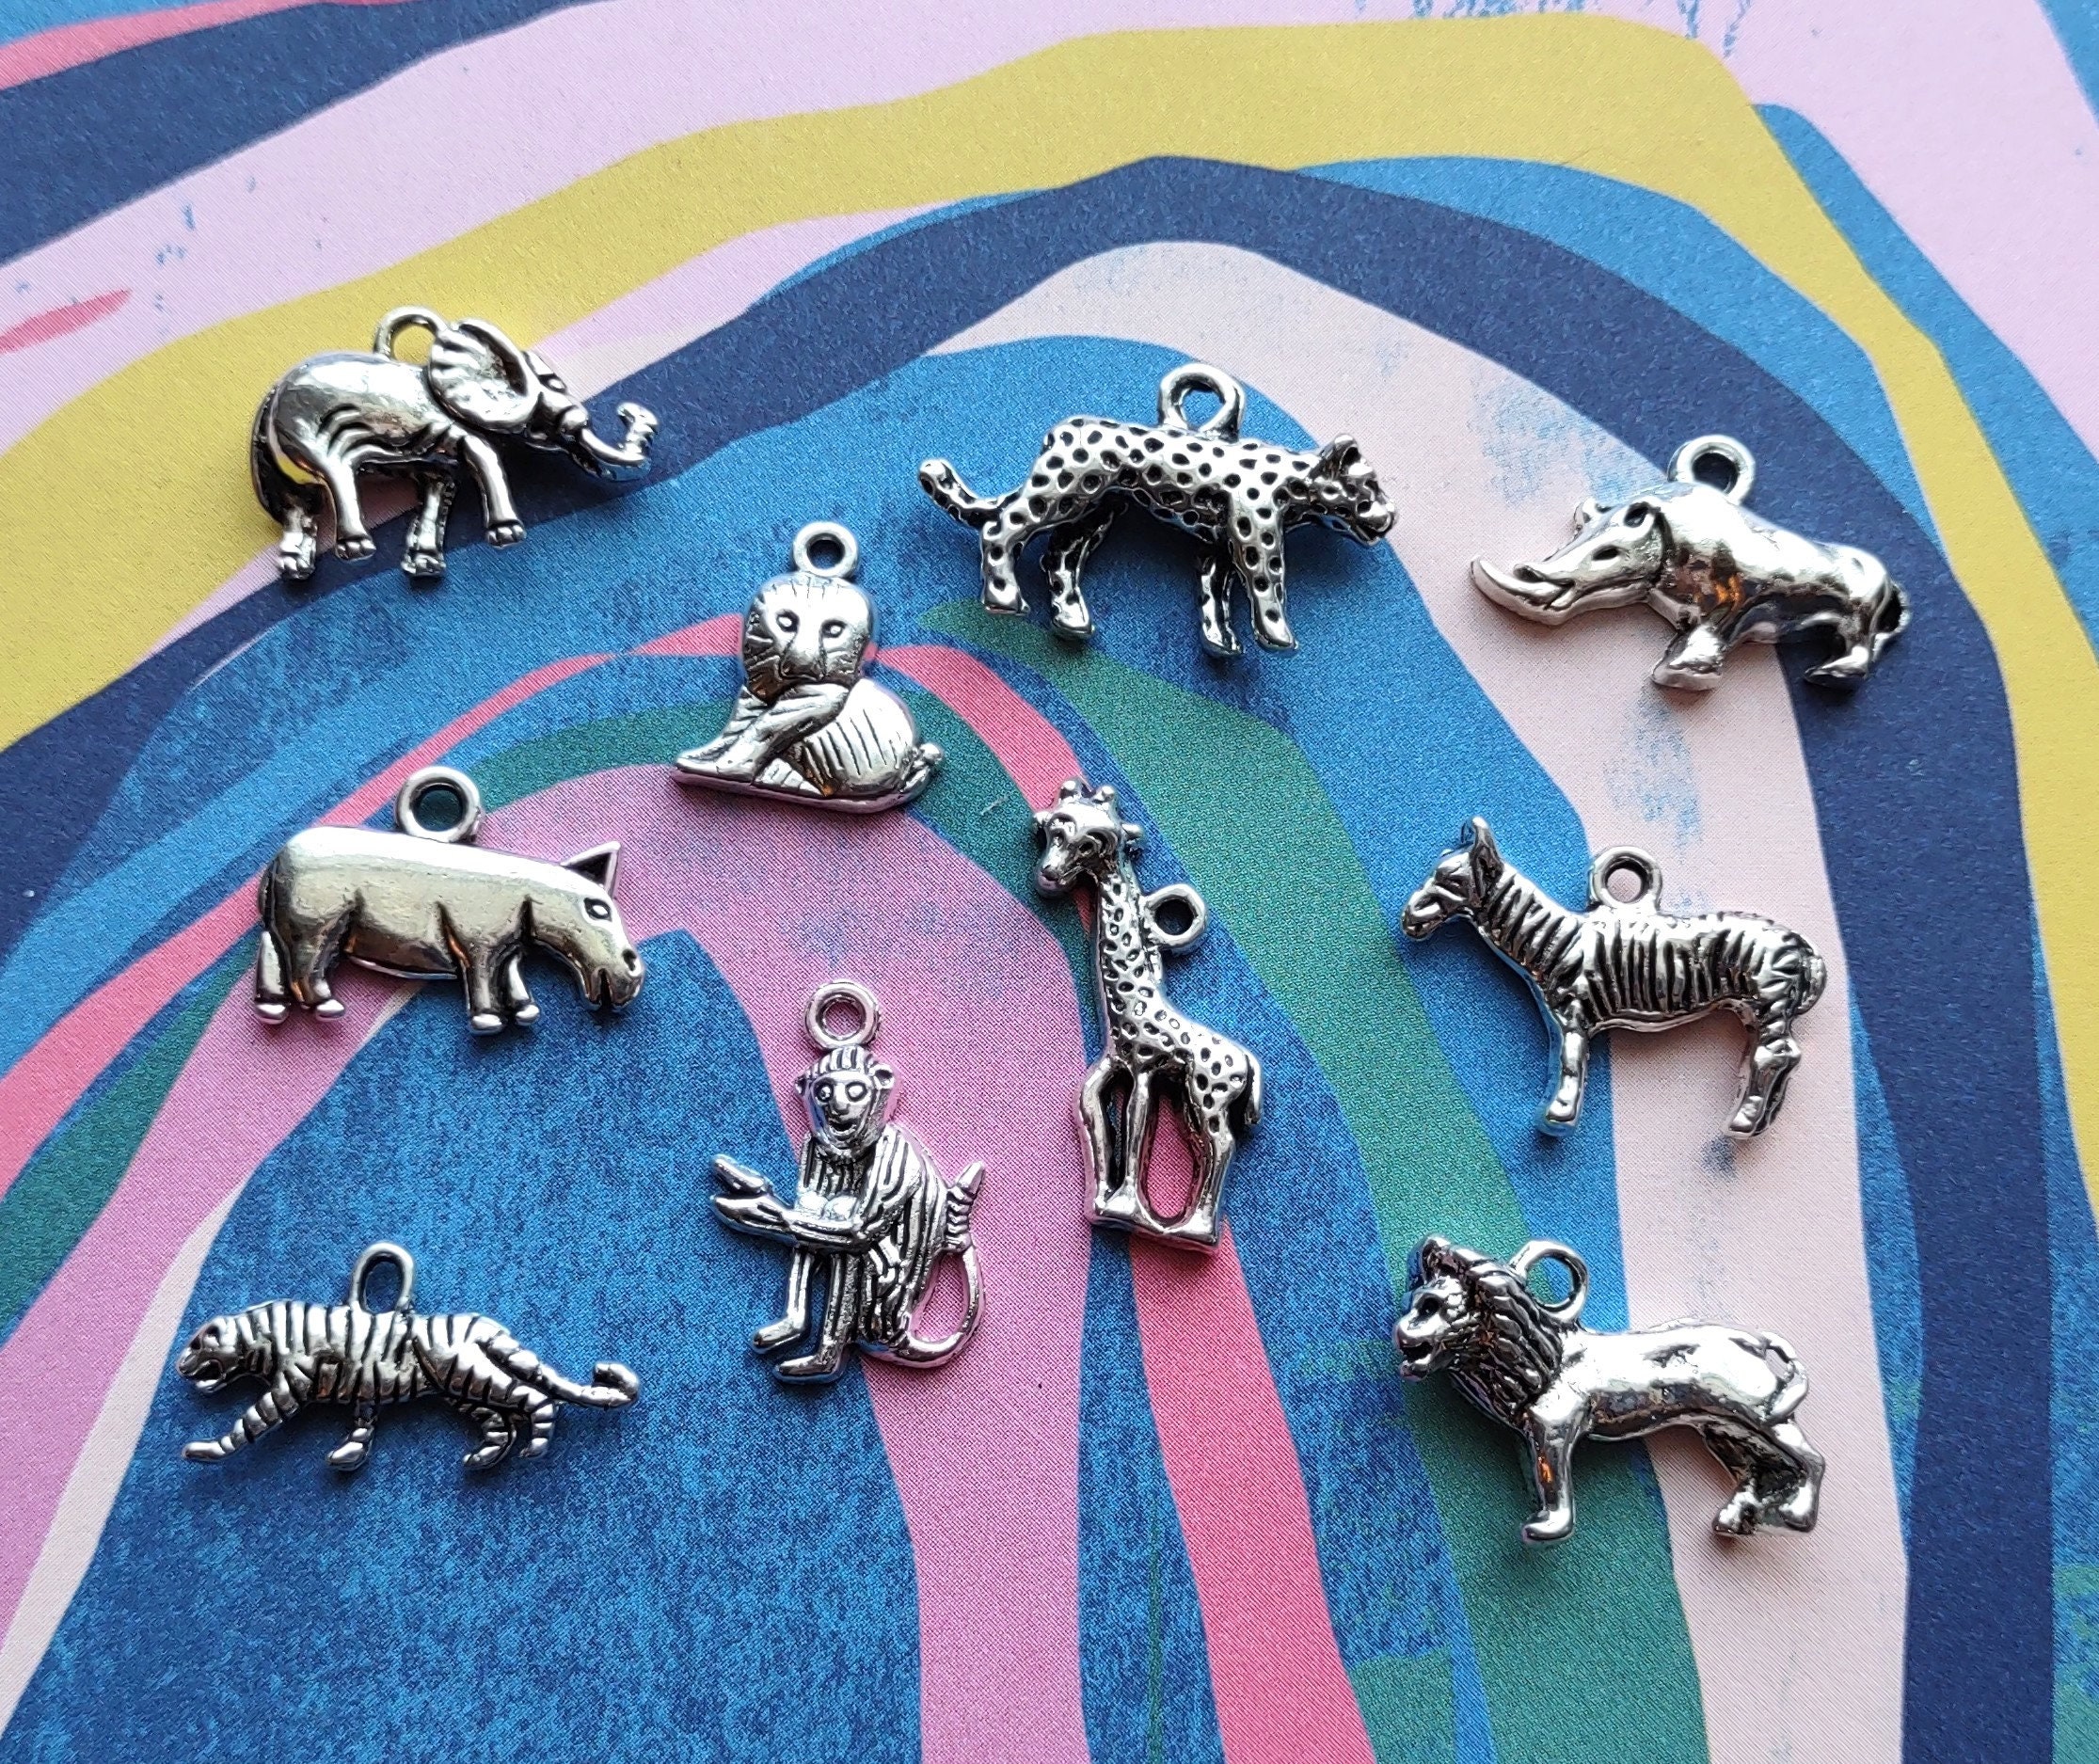 180 Pcs Animal Shaped Beads Zoo Animal Pony Bead Charms Plastic Colorful  Craft Beads 0.66 Pounds with Various Animal Design for Kids DIY Jewelry  Craft